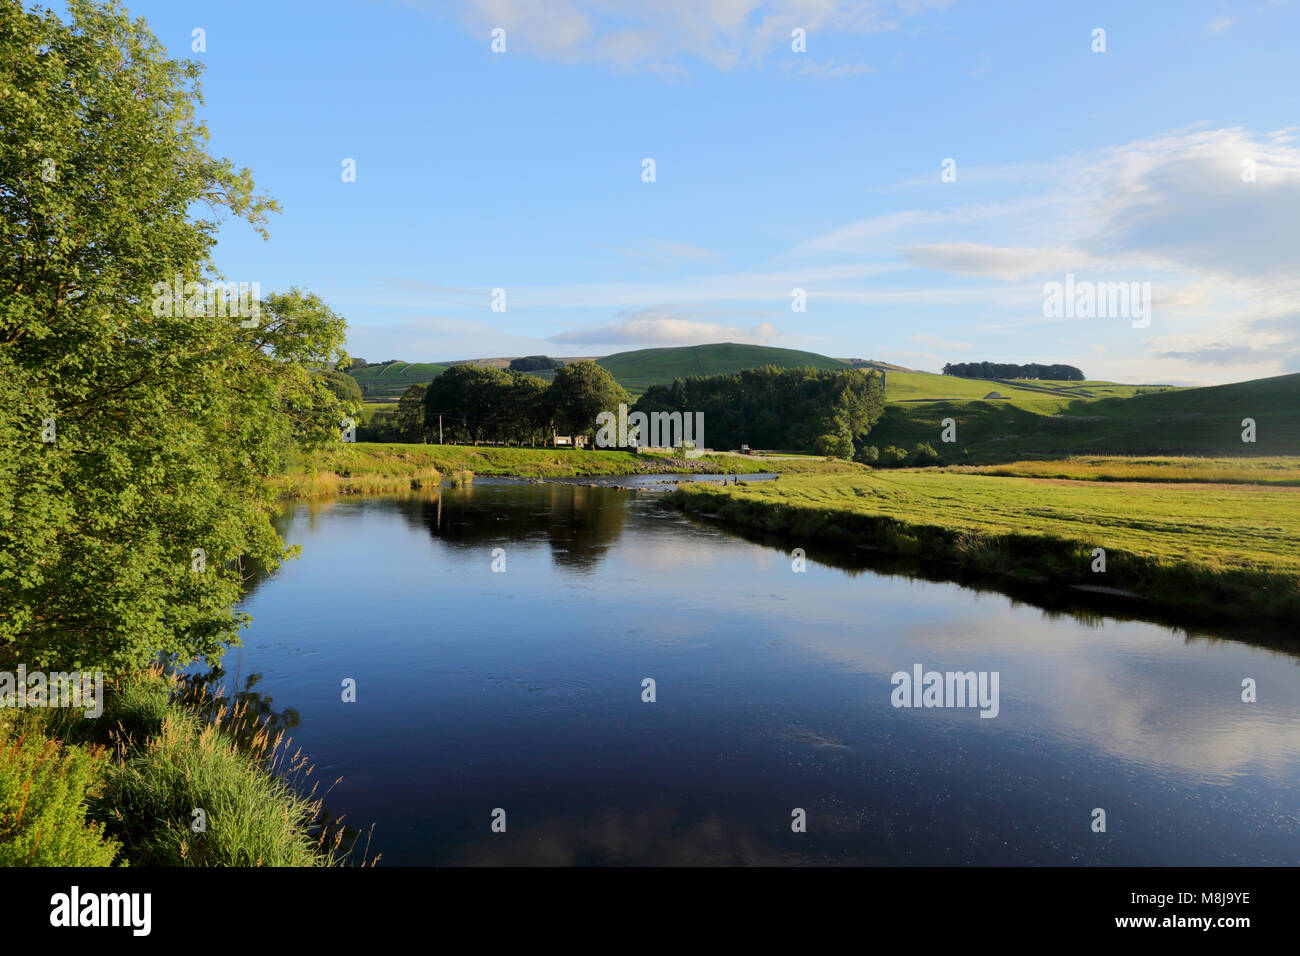 The beautiful River Wharfe in Wharfedale, just downstream of Grassington, Yorkshire Dales National Park, North Yorkshire, England, on a still day Stock Photo